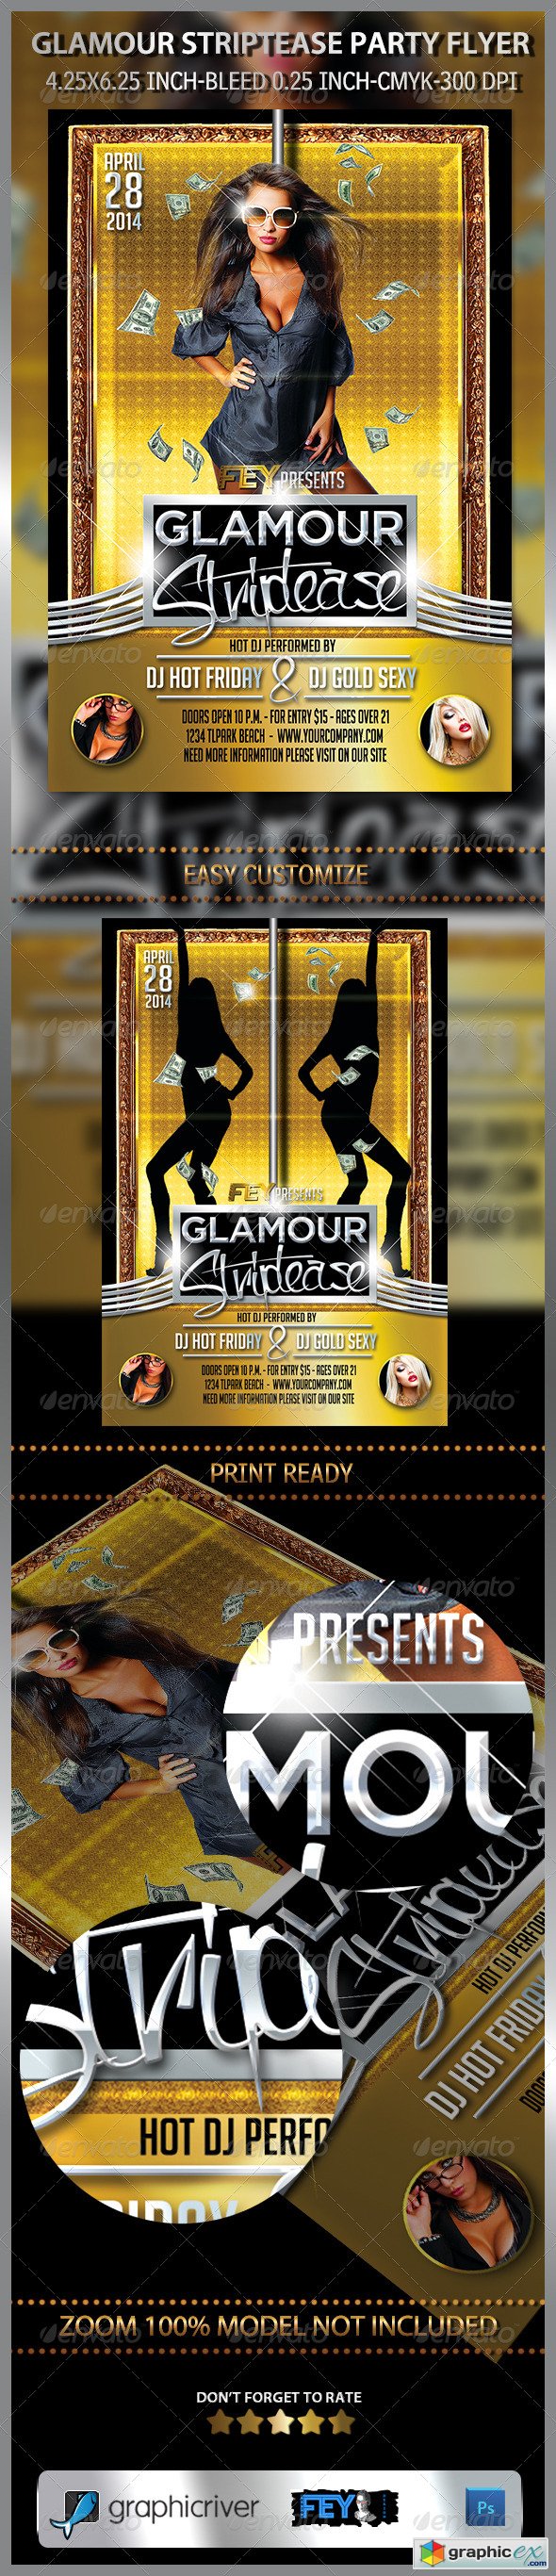 Glamour Striptease Party Flyer